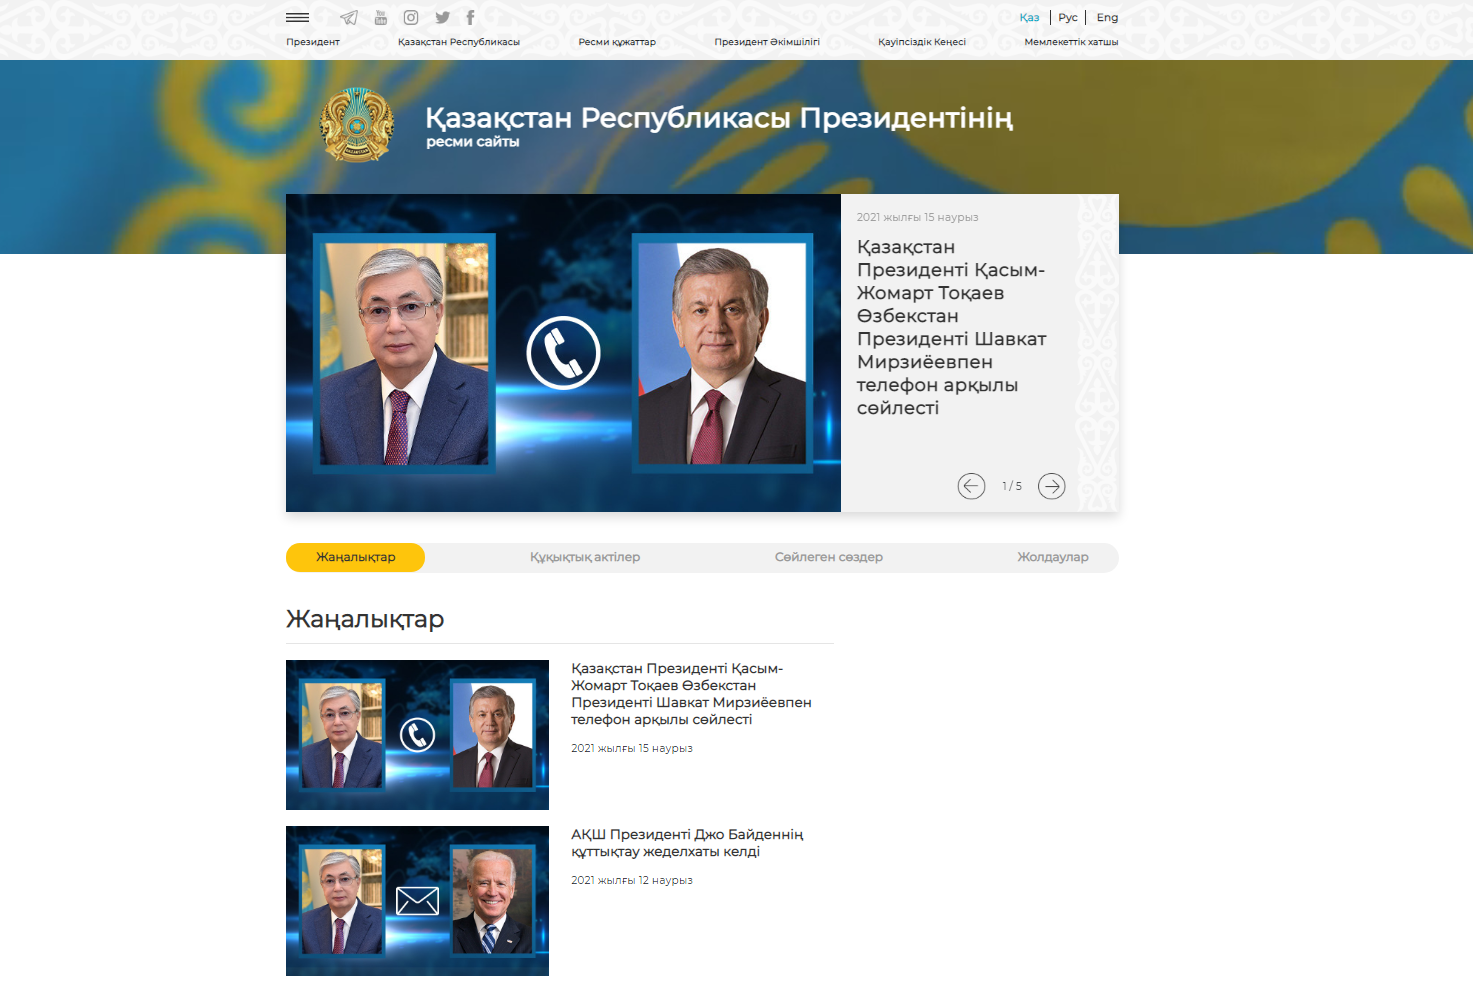 The official website of the President of Kazakhstan launched in a new format